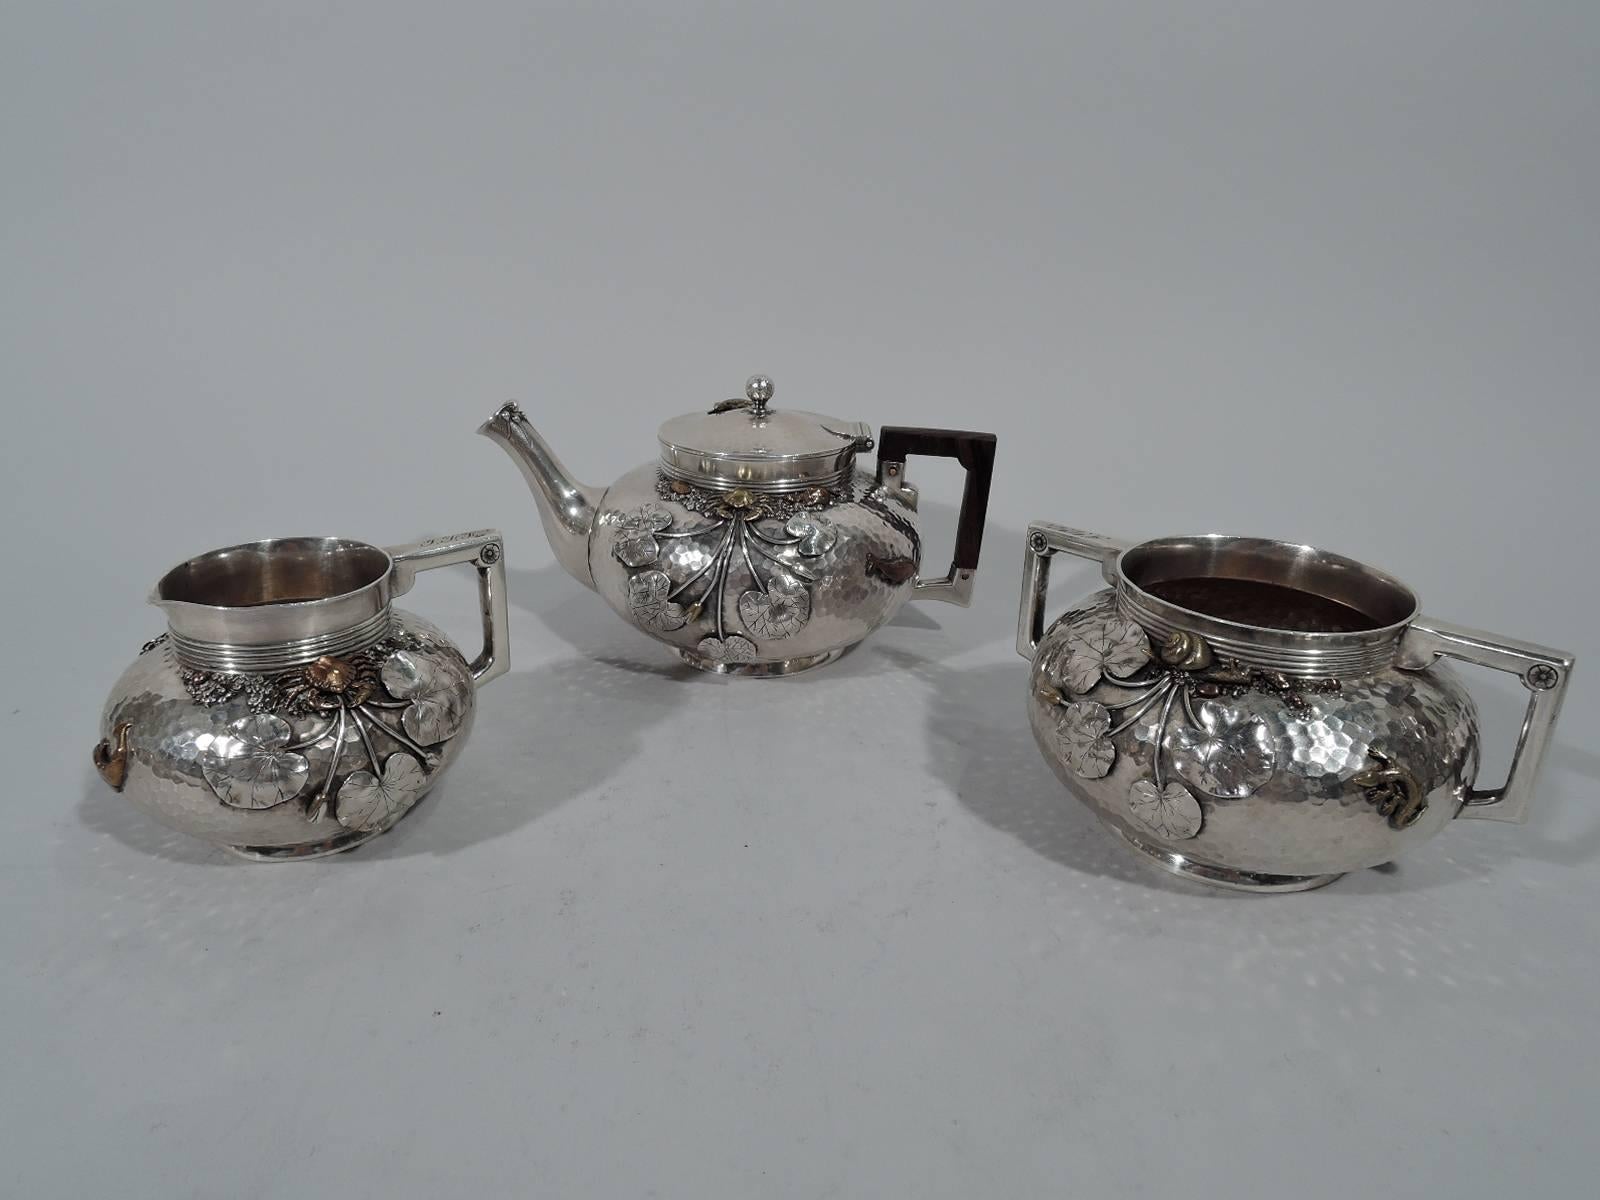 Japonesque sterling silver and mixed metal tea set. Made by Gorham in Providence in 1879-1880. This set comprises teapot, creamer, and sugar.

Each: Bellied with short reeded neck and foot ring. Bracket handles (teapot handle stained wood). Teapot